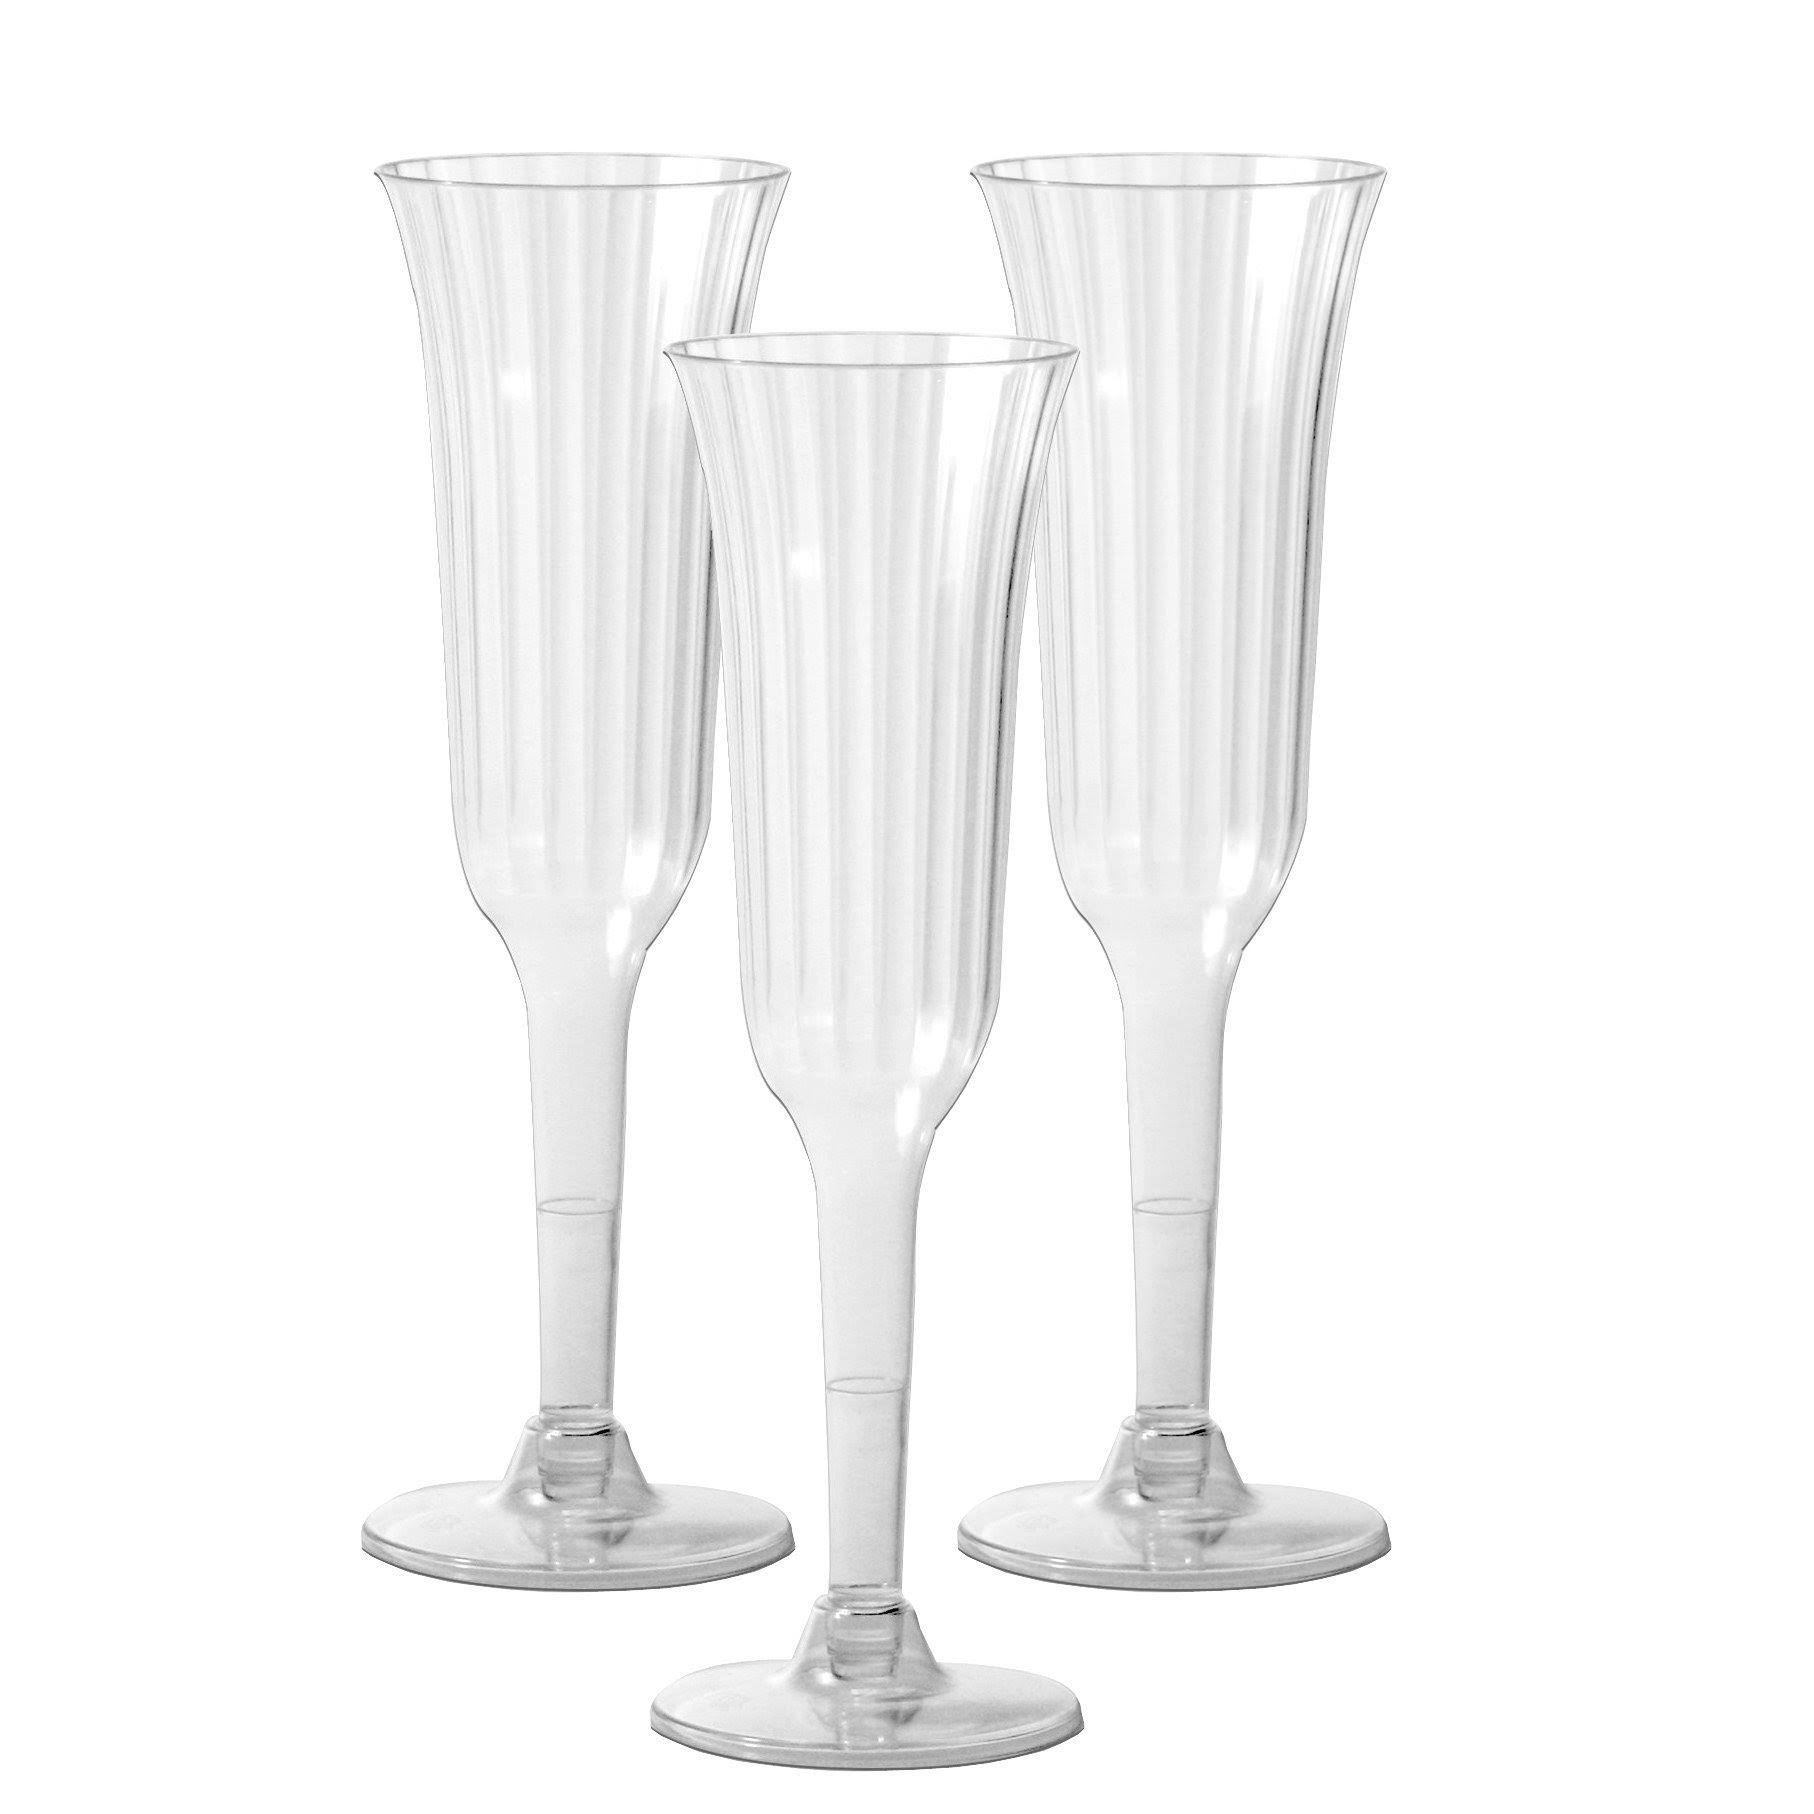 Party Essentials Two-piece Hard Plastic Deluxe Champagne Flutes - 6oz, Clear, 10ct